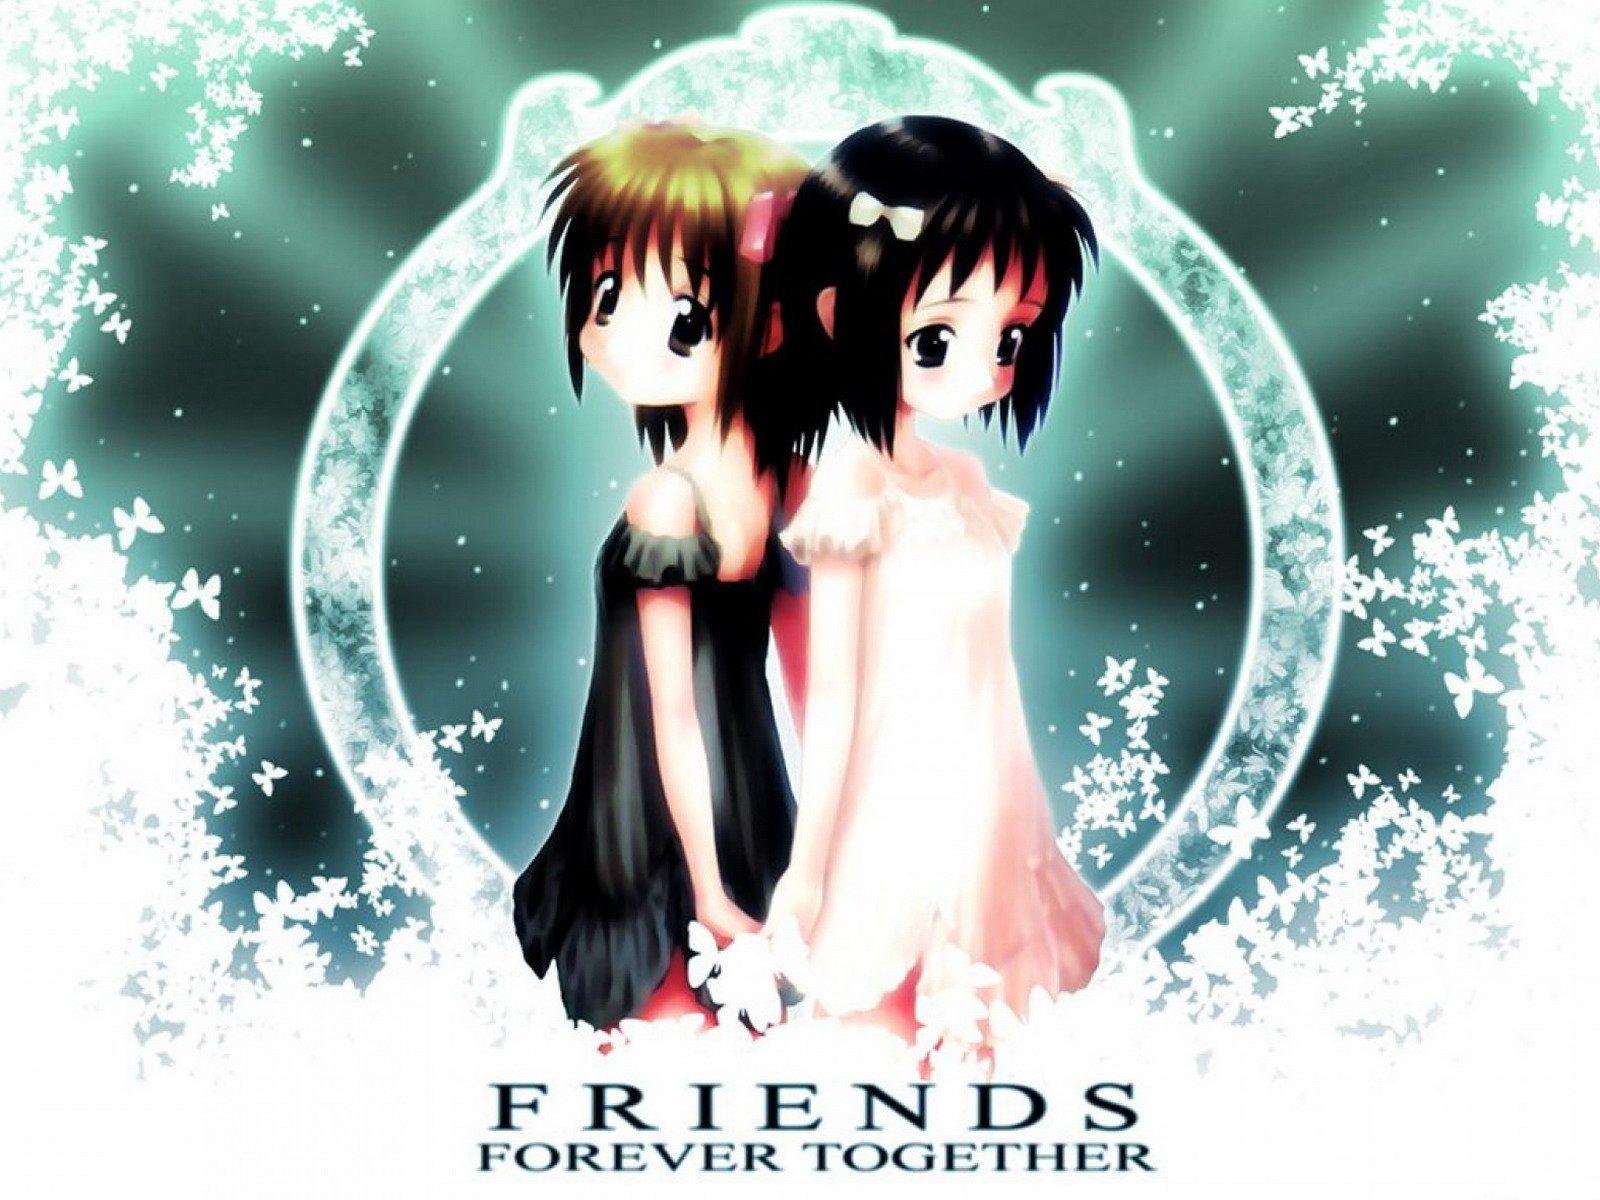 Anime Wallpaper Free Friends Forever Together